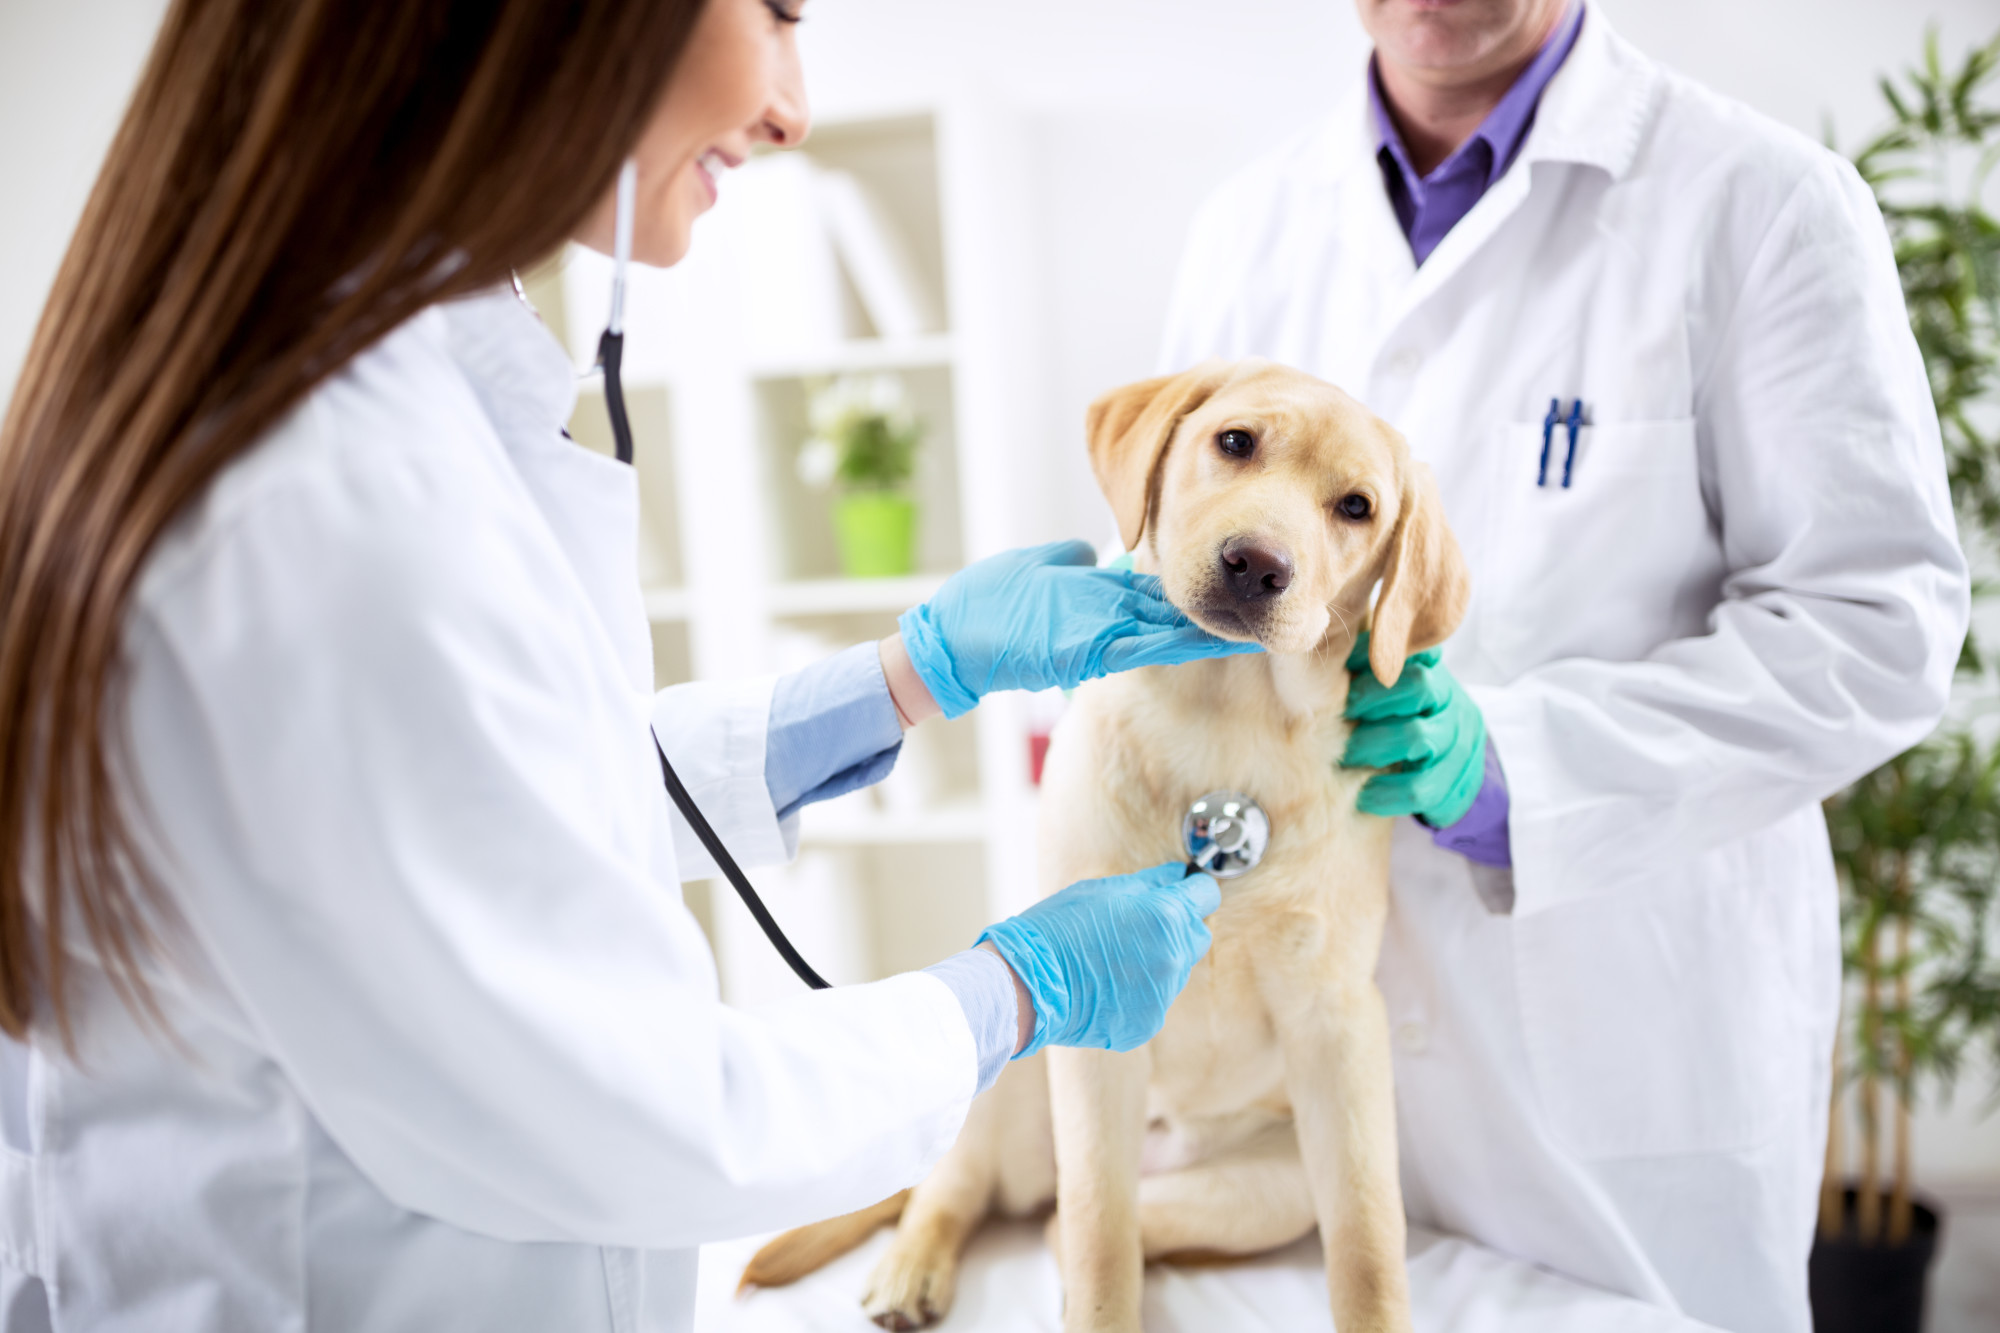 If you love animals, you should consider becoming a veterinarian. Learn more about these advantages by clicking right here.